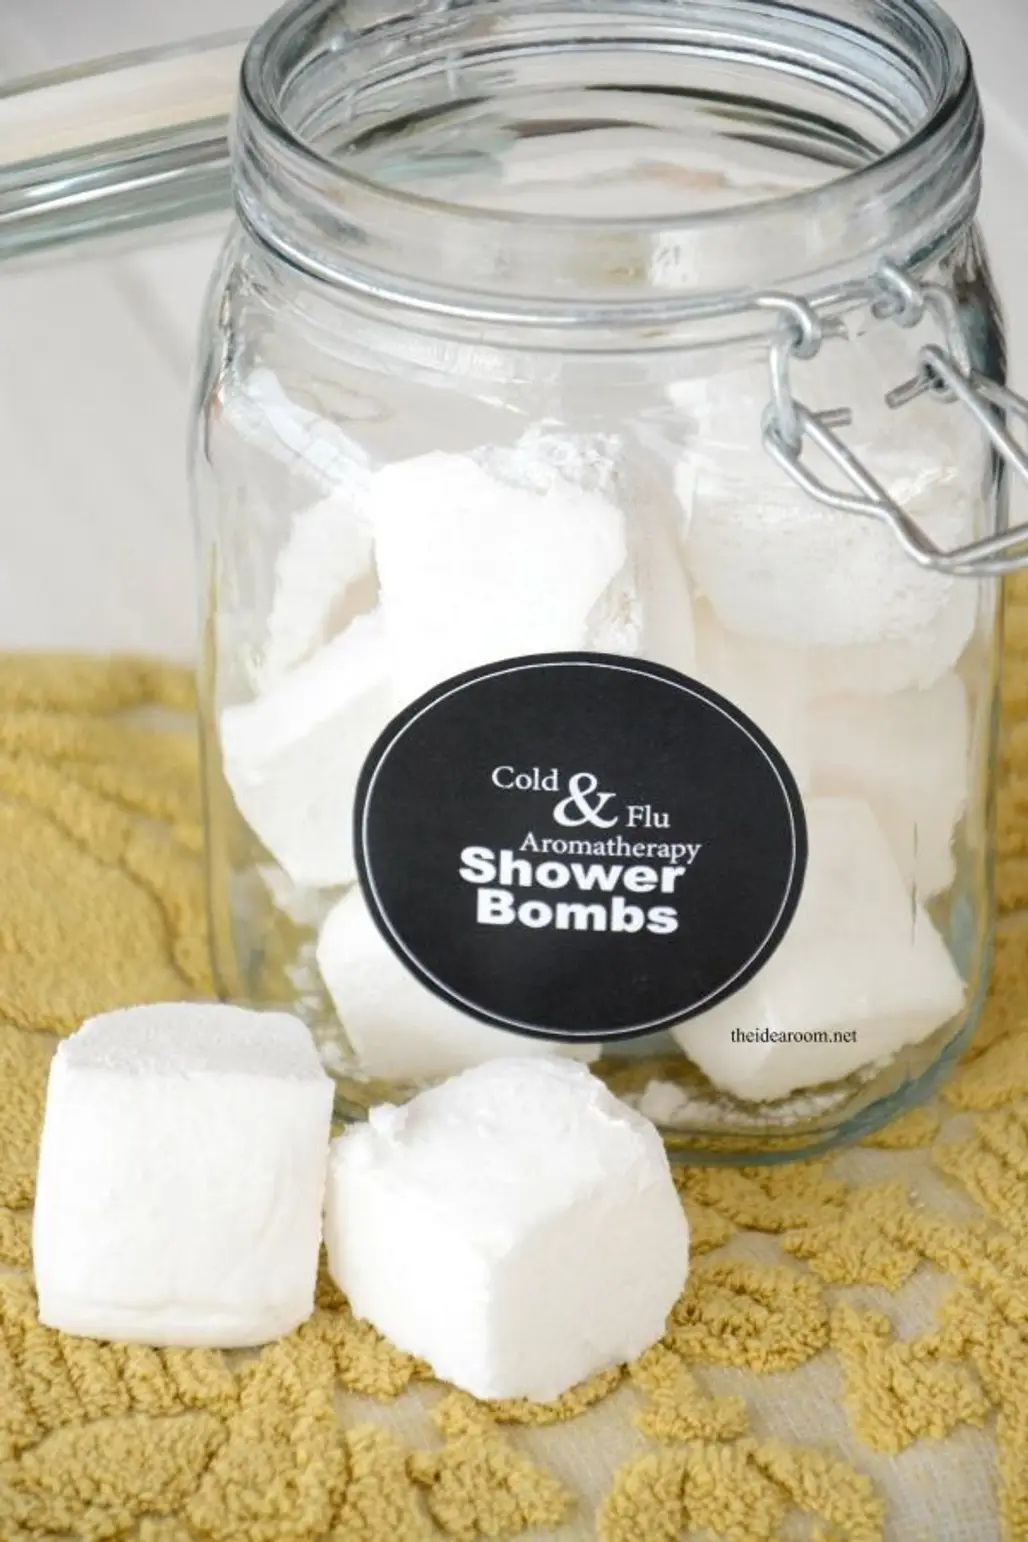 Cold & Flu Aromatherapy Shower Bombs